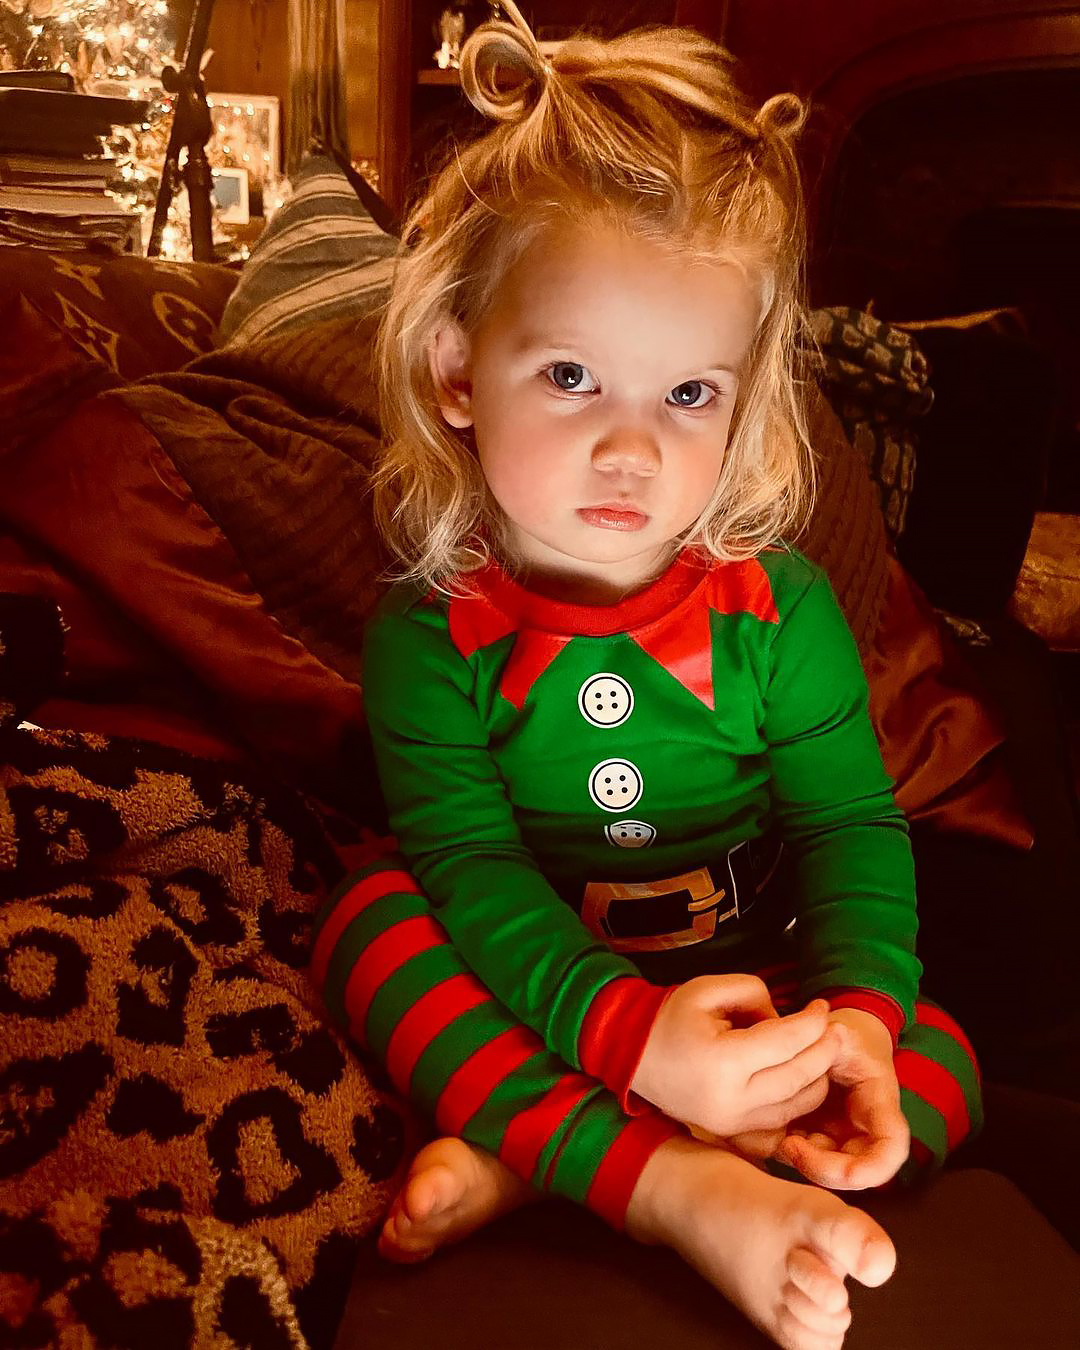 Jessica Simpson's adorable daughter is a mood